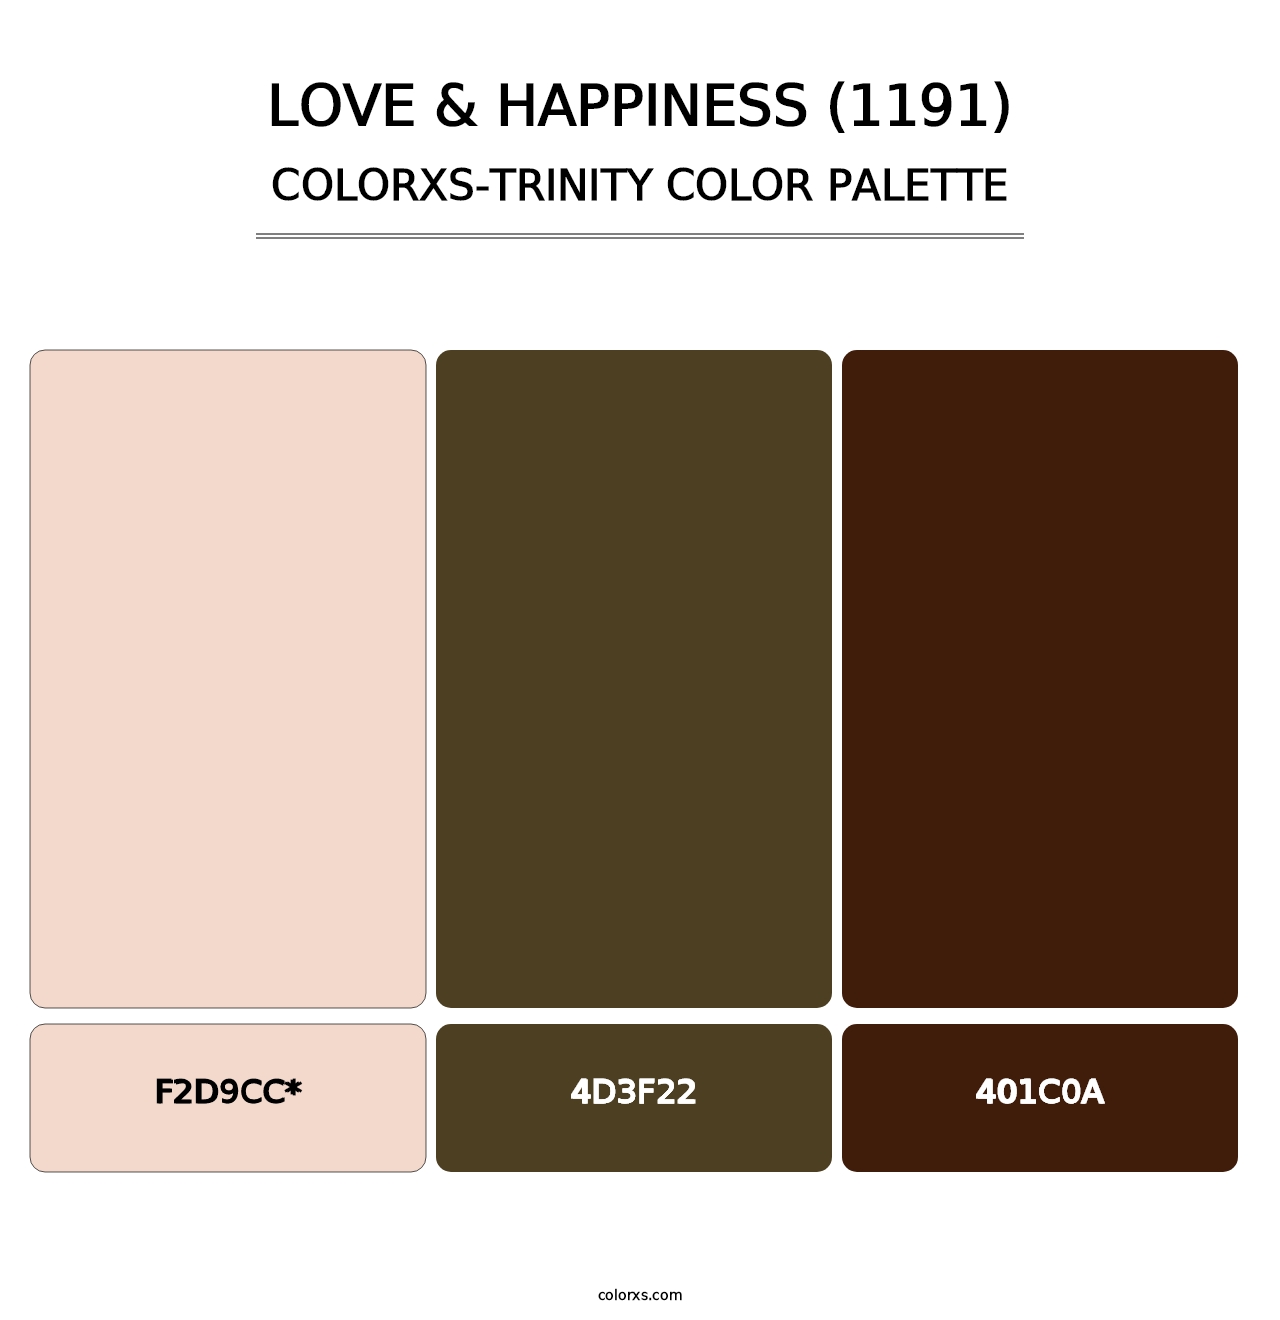 Love & Happiness (1191) - Colorxs Trinity Palette